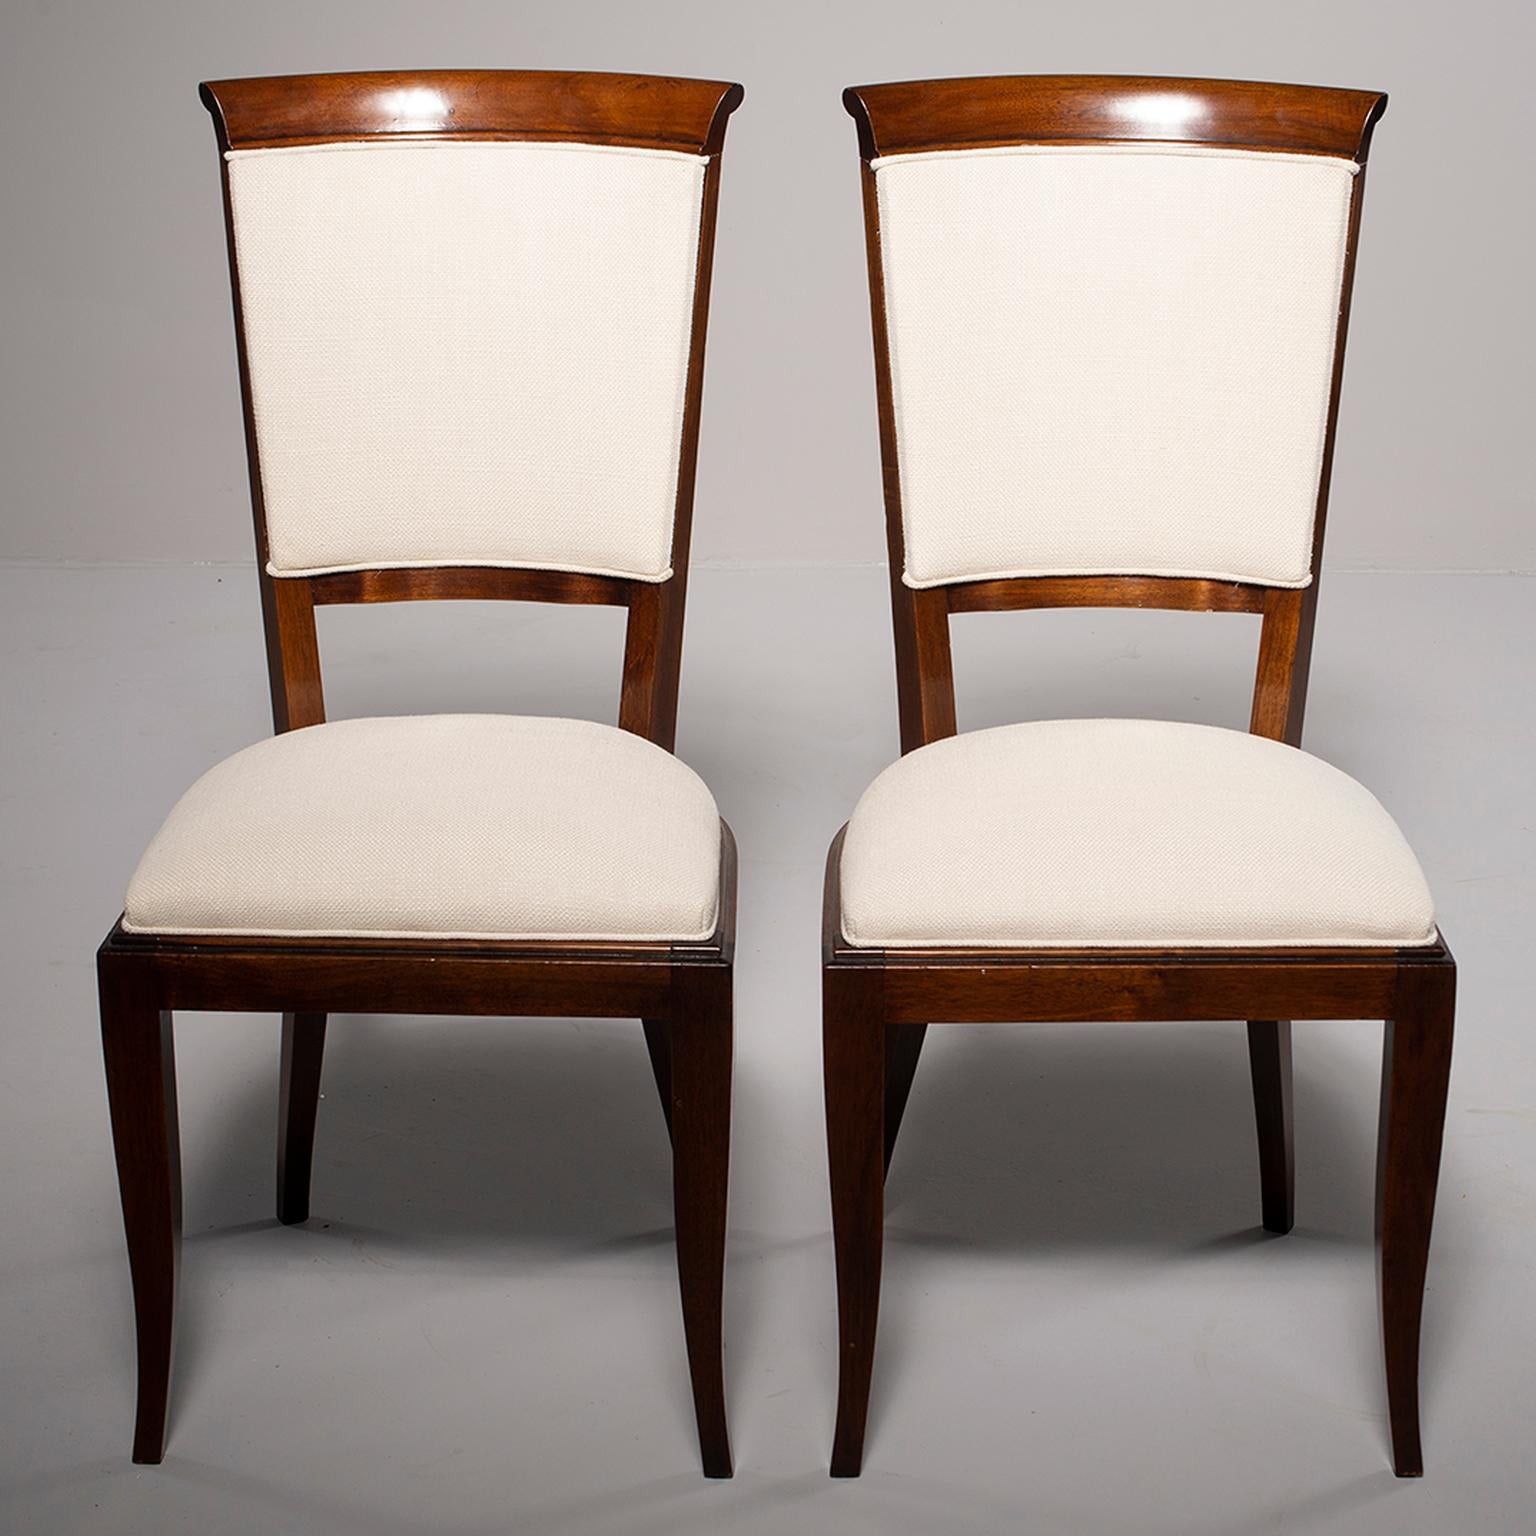 Set of dark stained beech chairs found in Italy, circa 1950s. We had the frames professionally polished in England and the seats and backs have been reupholstered in an off-white dobby woven linen blend fabric. Seats are 20” high and 16” deep. Sold